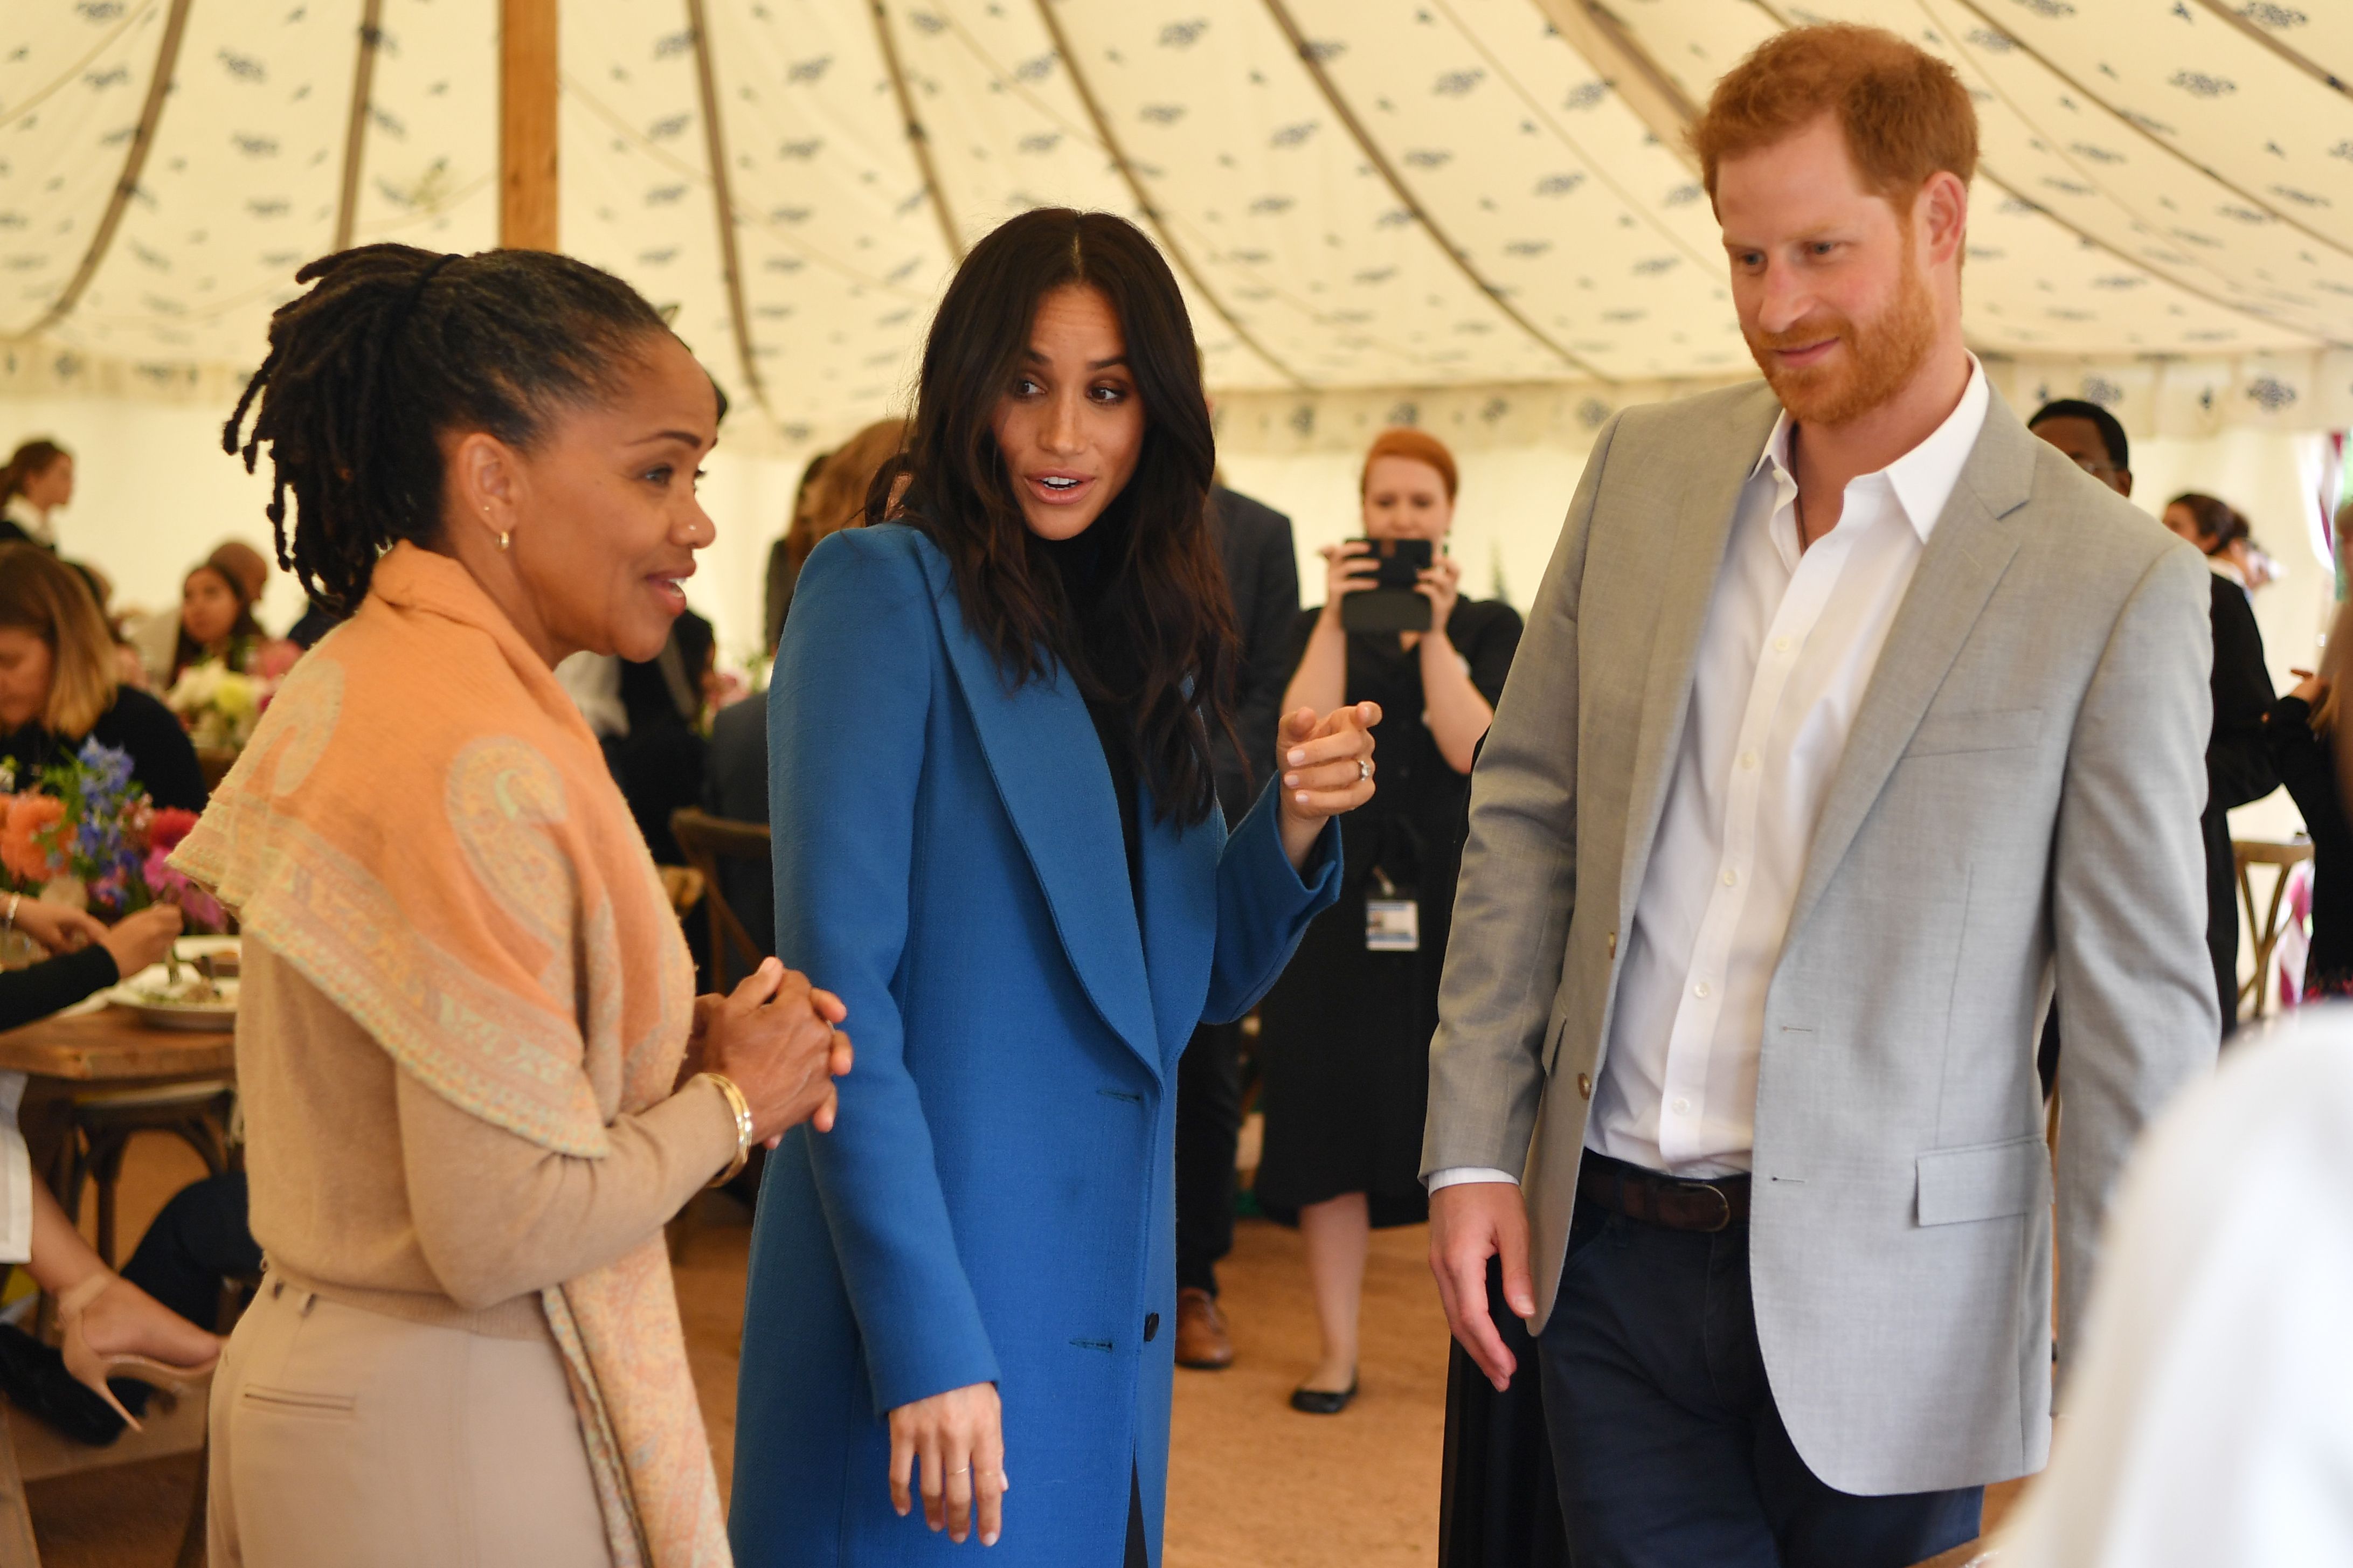 Doria Ragland, Duchess Meghan, and Prince Harry at the launch of a cookbook with recipes from a group of women affected by the Grenfell Tower fire at Kensington Palace in London on September 20, 2018. | Source: Getty Images